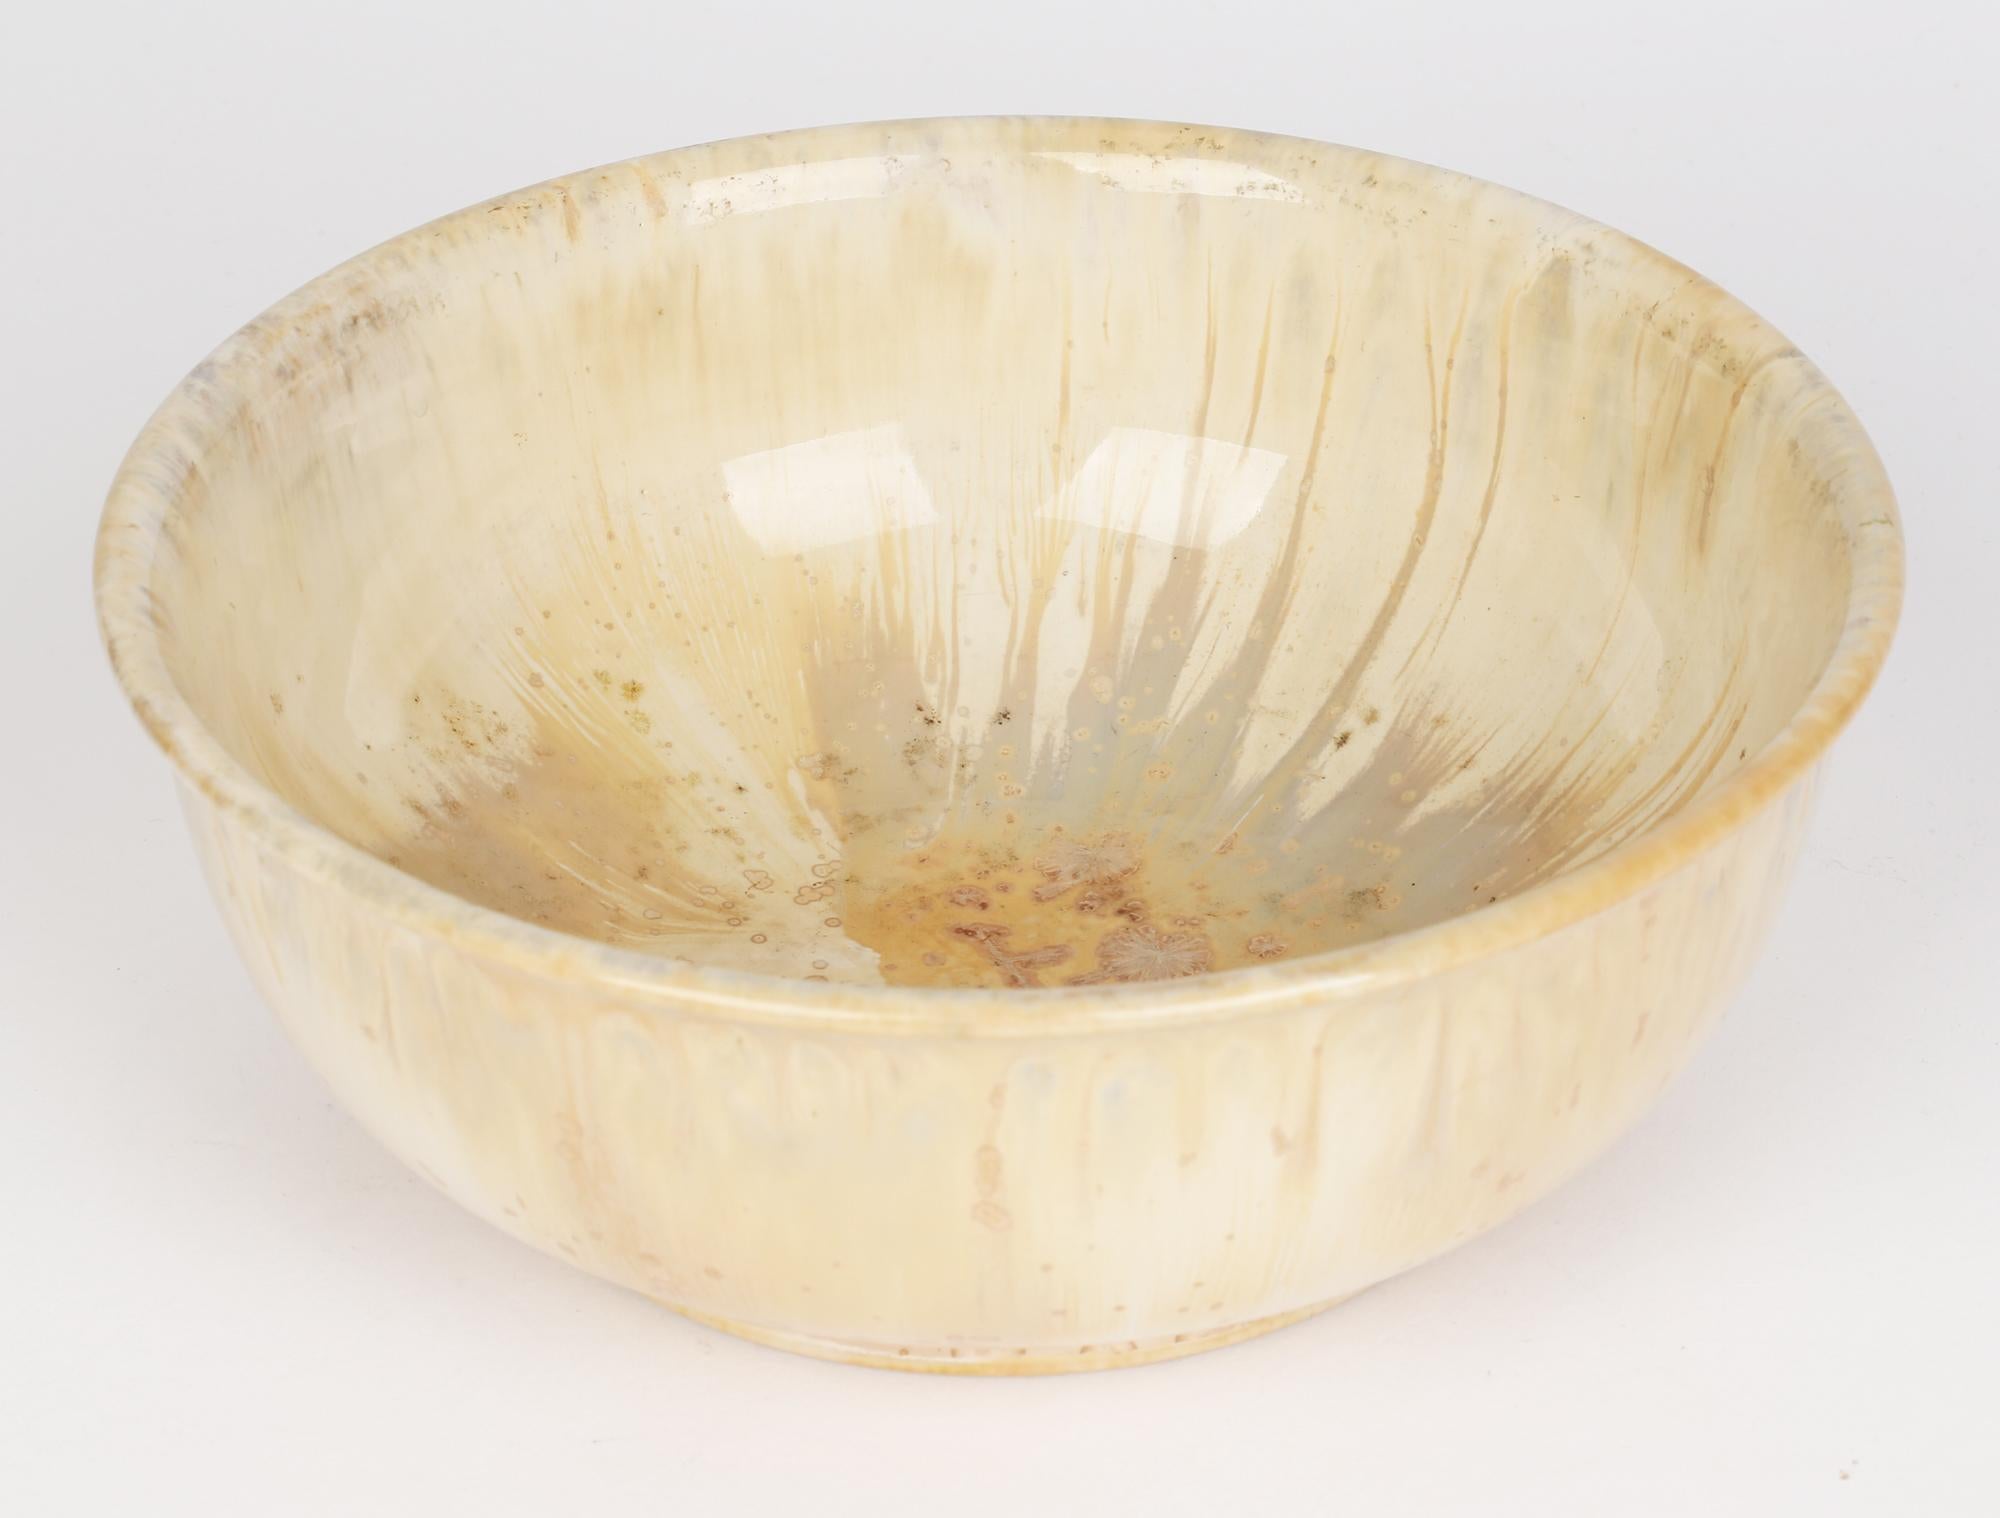 A rare and stunning Art Deco Doulton Lambeth ceramic bowl decorated in cream, brown and grey crystalline glazes by Cuthbert Bailey and dating from around 1925. The wide rounded bowl stands on a narrow foot rim with a raised edge and folded back rim.